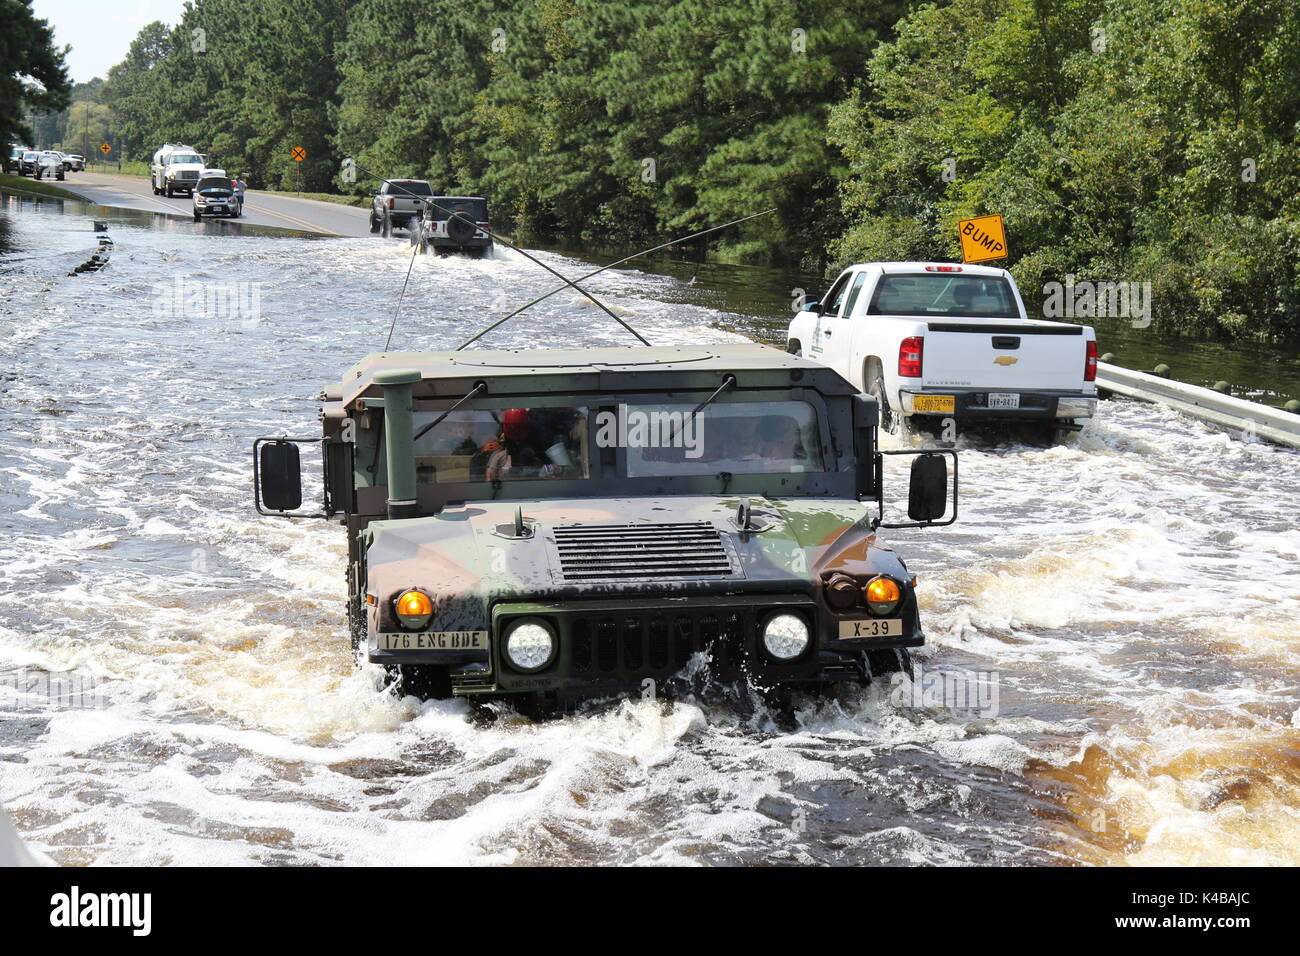 U.S Army soldiers use a humvee jeep to search for residents in need of assistance trapped by floodwaters in the aftermath of Hurricane Harvey September 4, 2017 in Port Arthur, Texas. Stock Photo